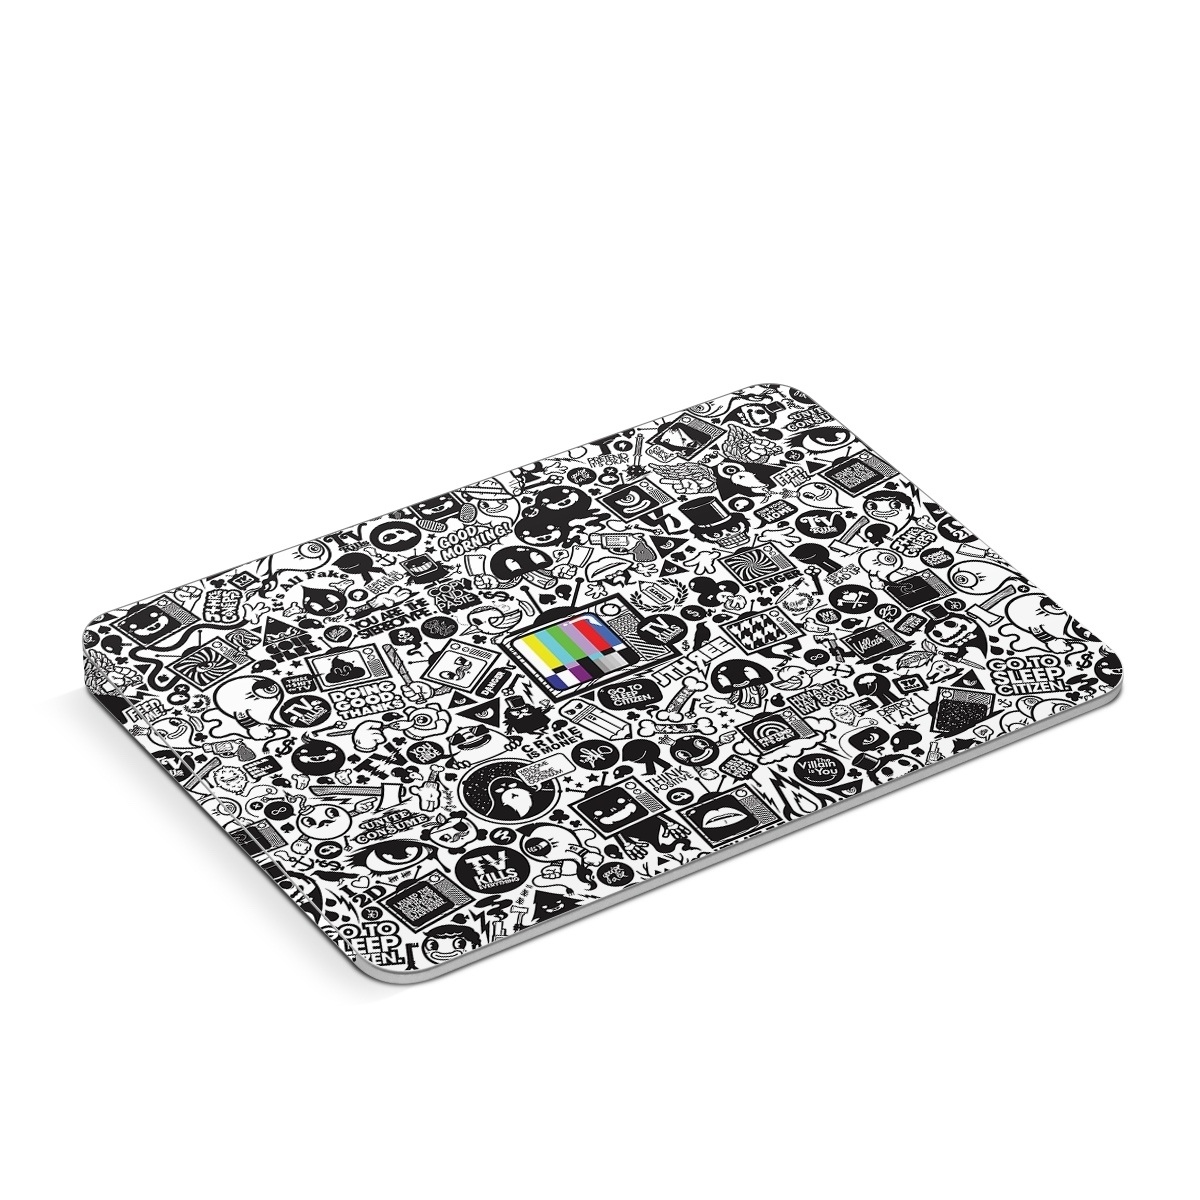 Apple Magic Trackpad Skin design of Pattern, Drawing, Doodle, Design, Visual arts, Font, Black-and-white, Monochrome, Illustration, Art, with gray, black, white colors